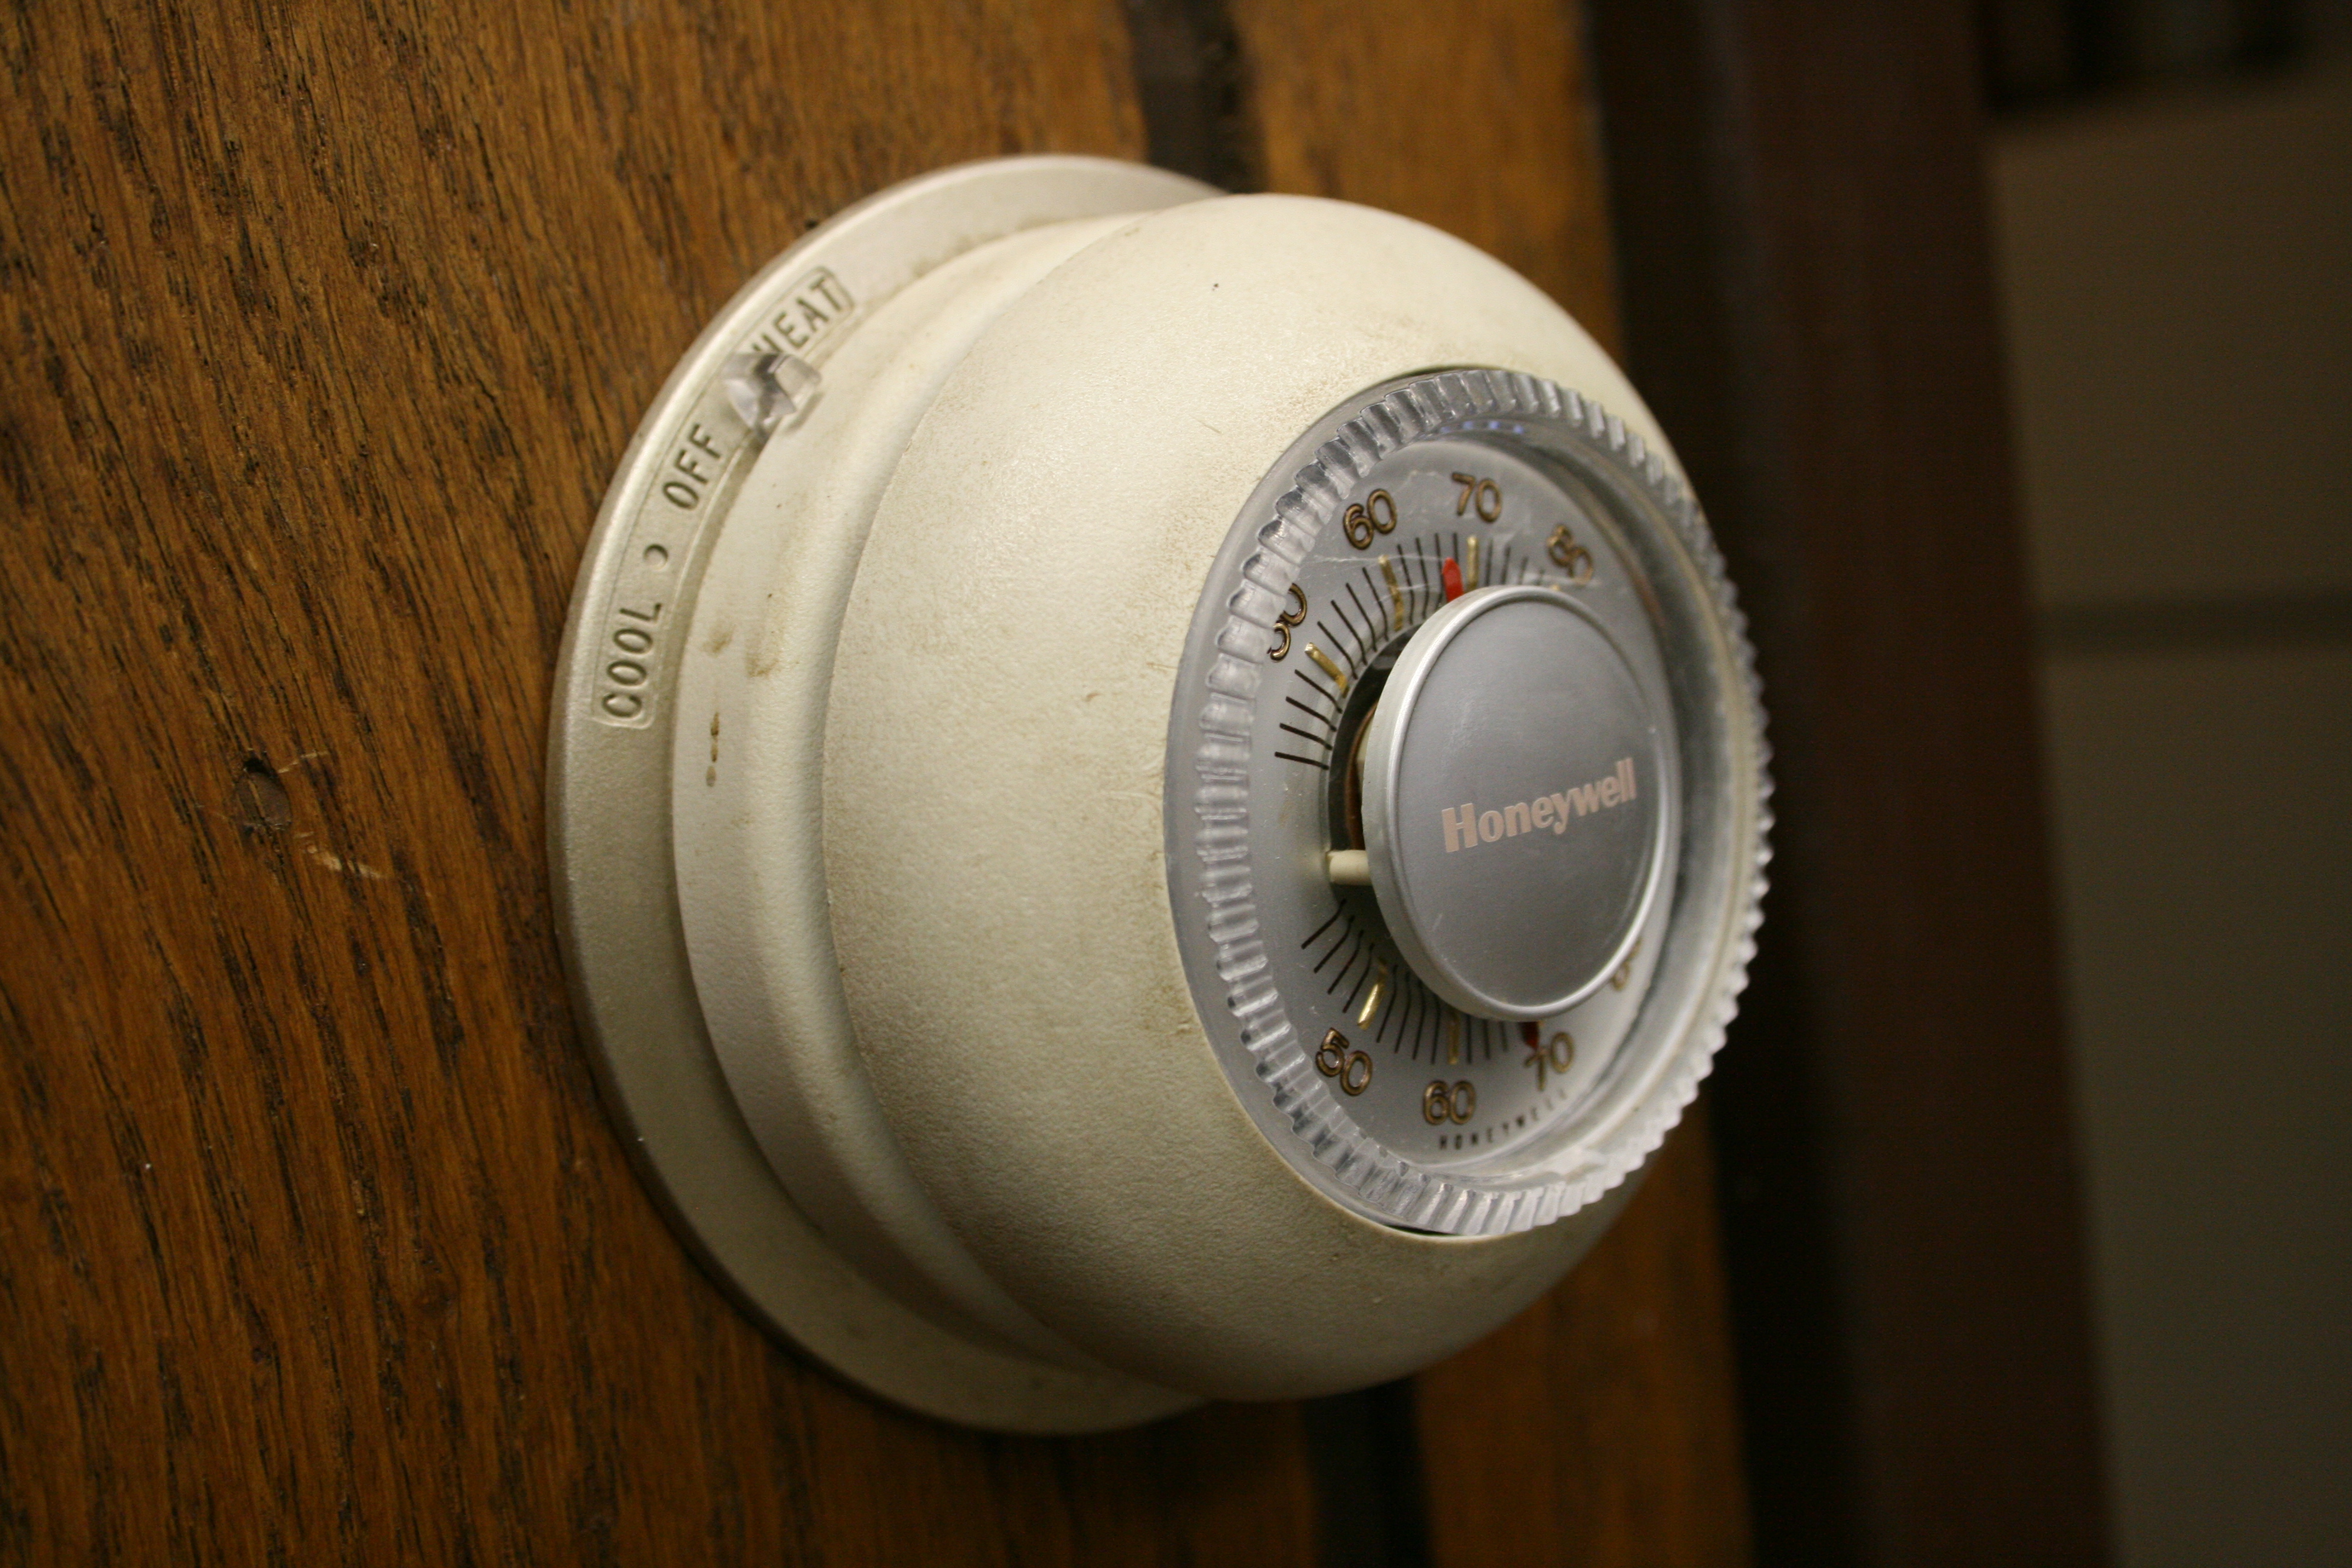 Image result for thermostat